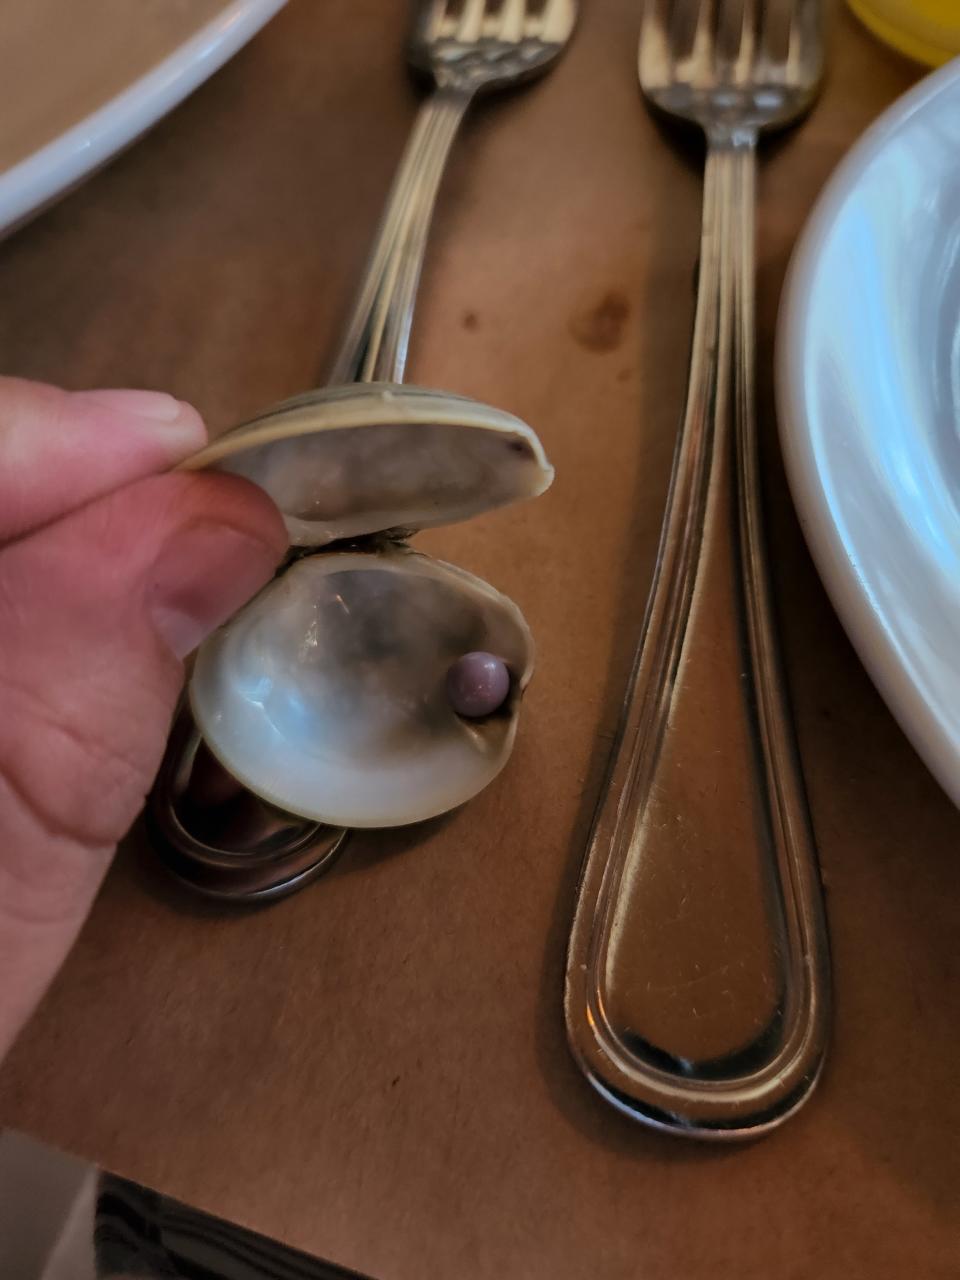 Overland's clam appetizer packed a surprising ingredient: a rare purple pearl. (Photo: Scott Overland)